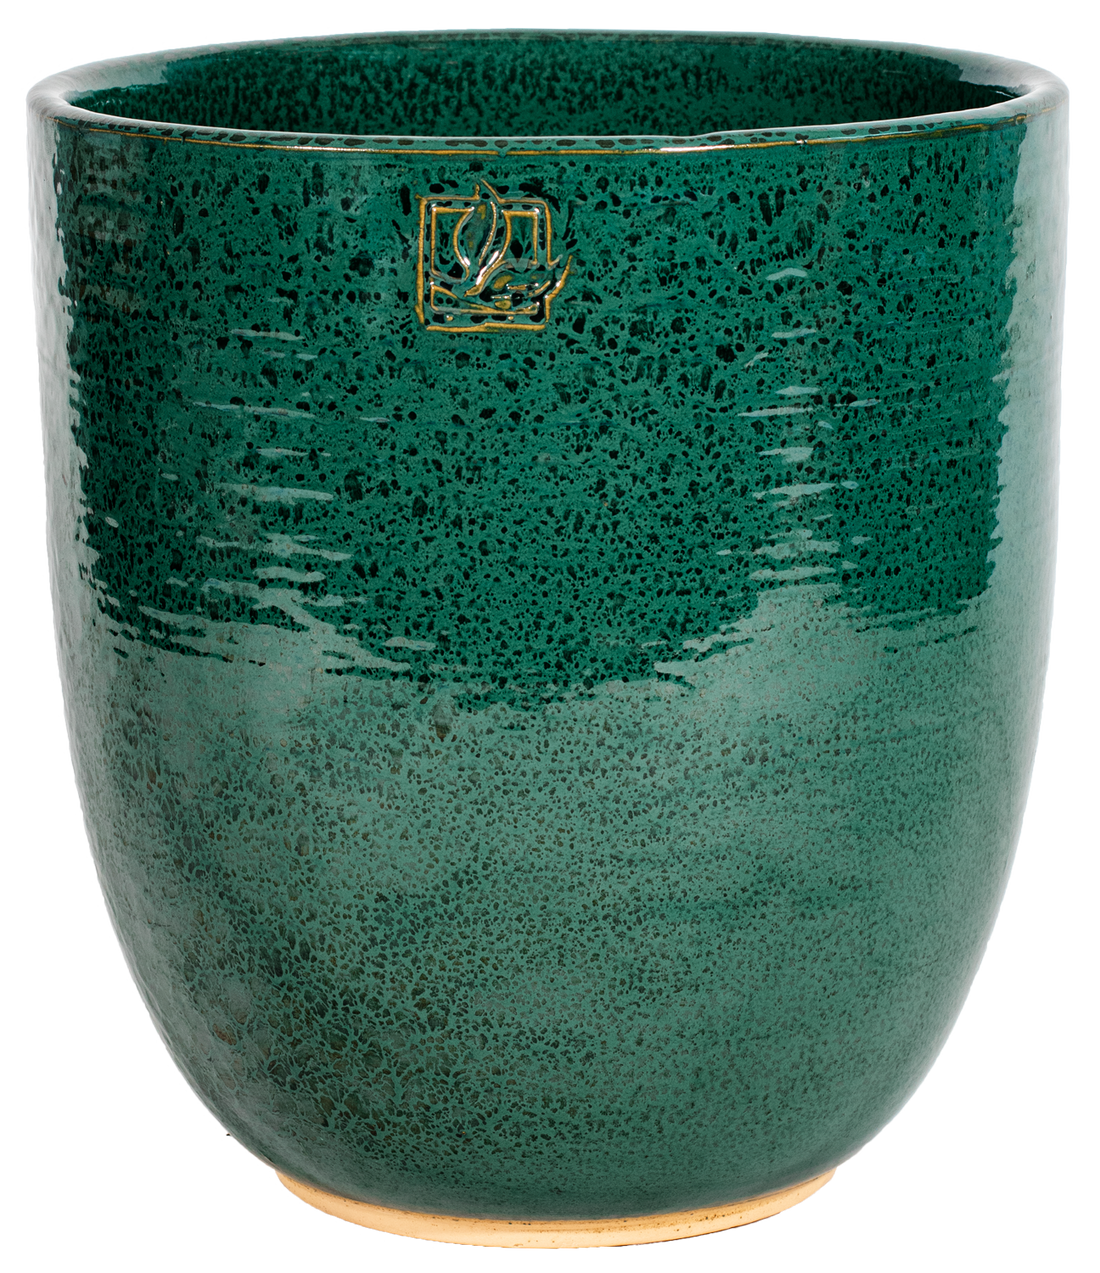 tall rounded green ceramic planter with a leaf stamp